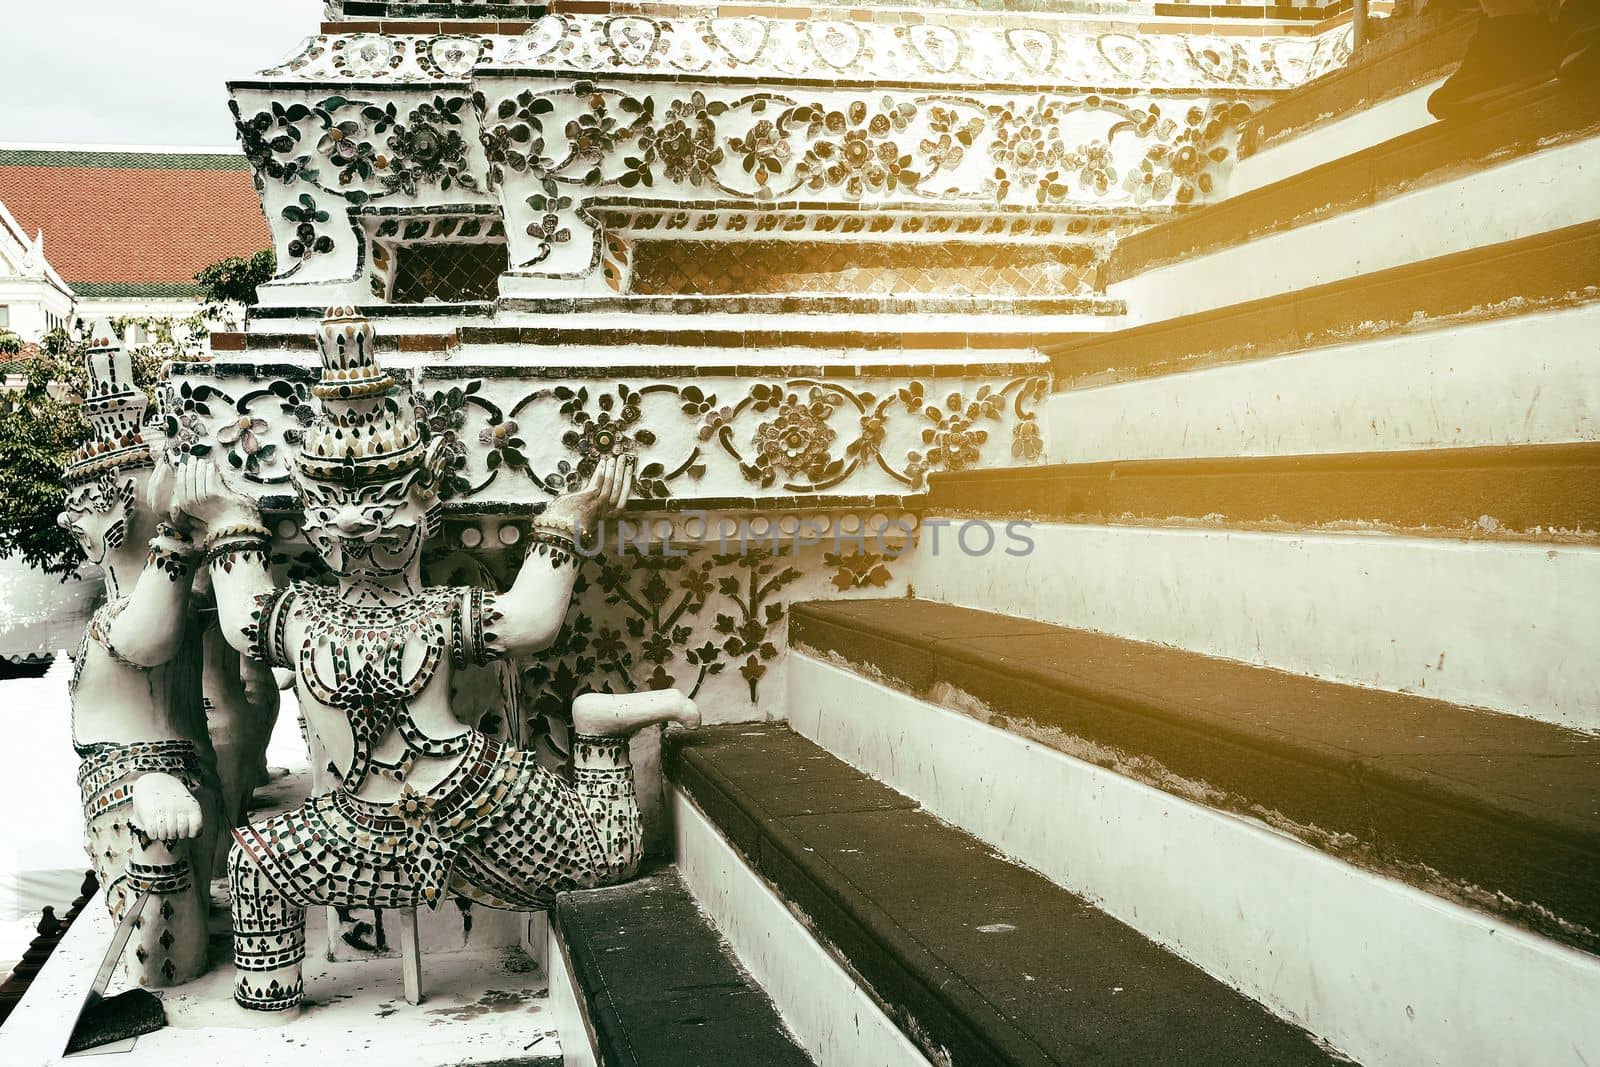 Ancient Giant Statue on Stair to Pagoda at Wat Arun Temple Bangkok, Thailand. by mesamong